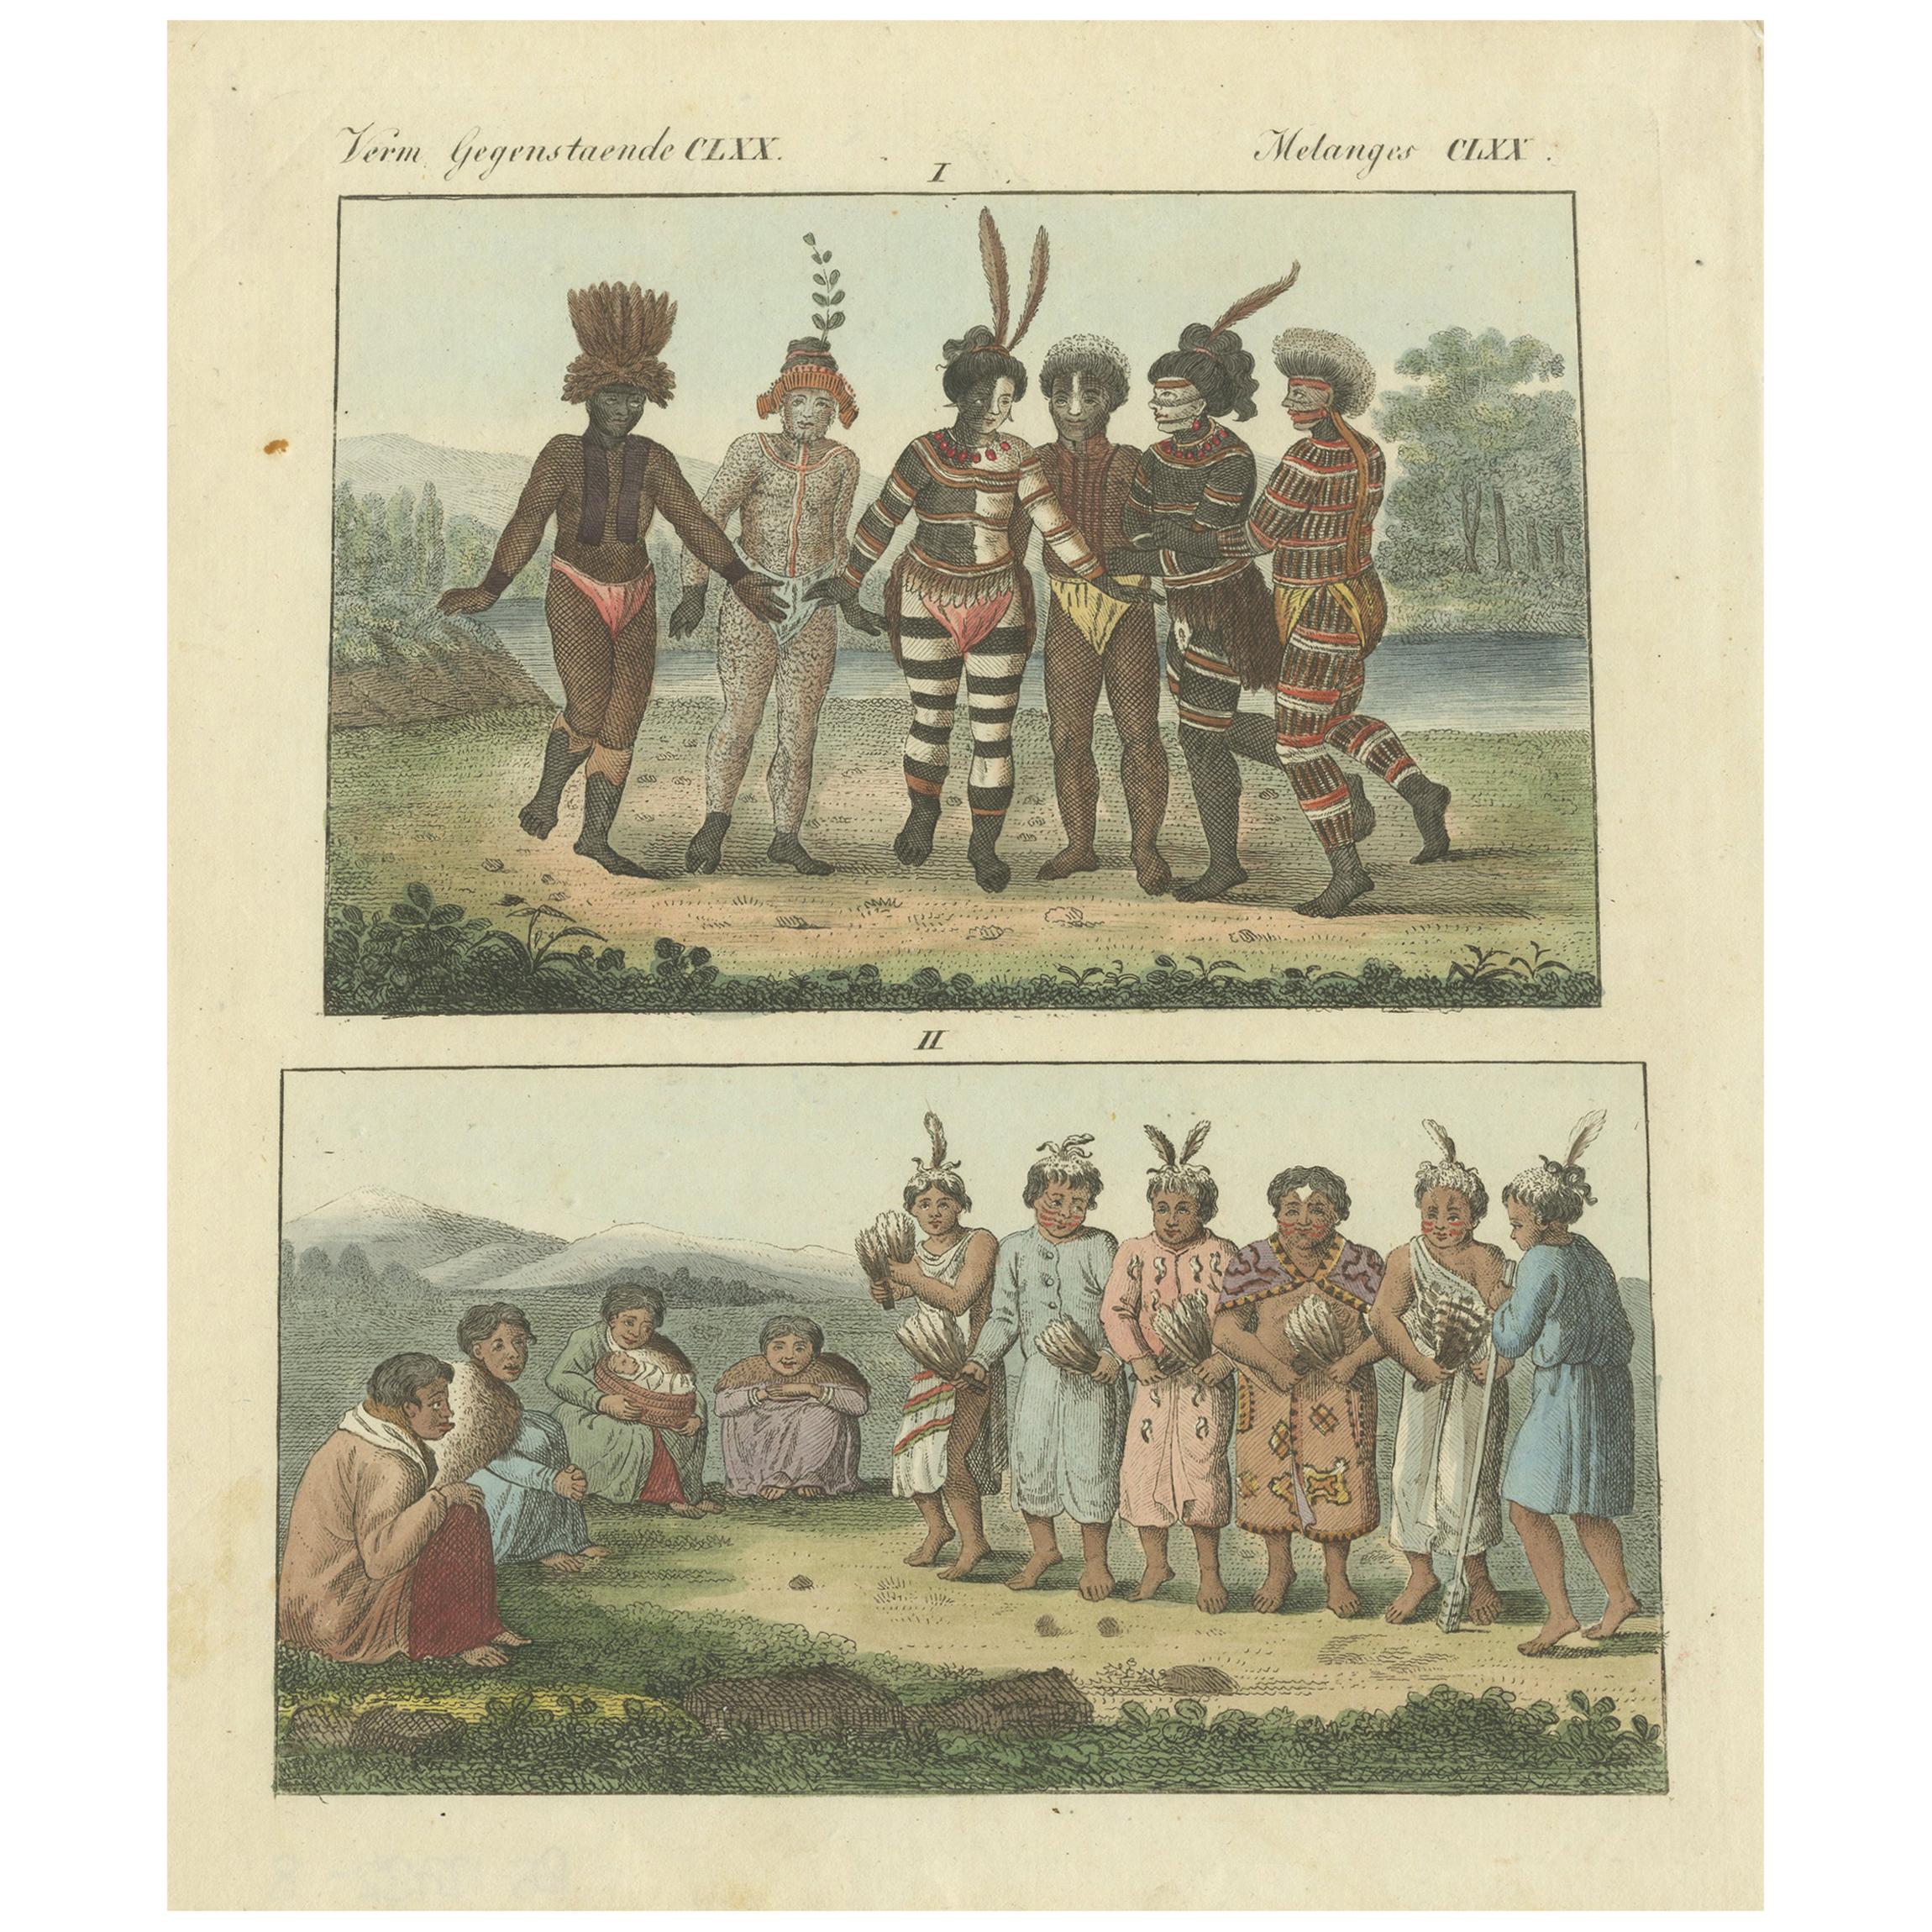 Antique Print of Natives of America by Bertuch, circa 1800